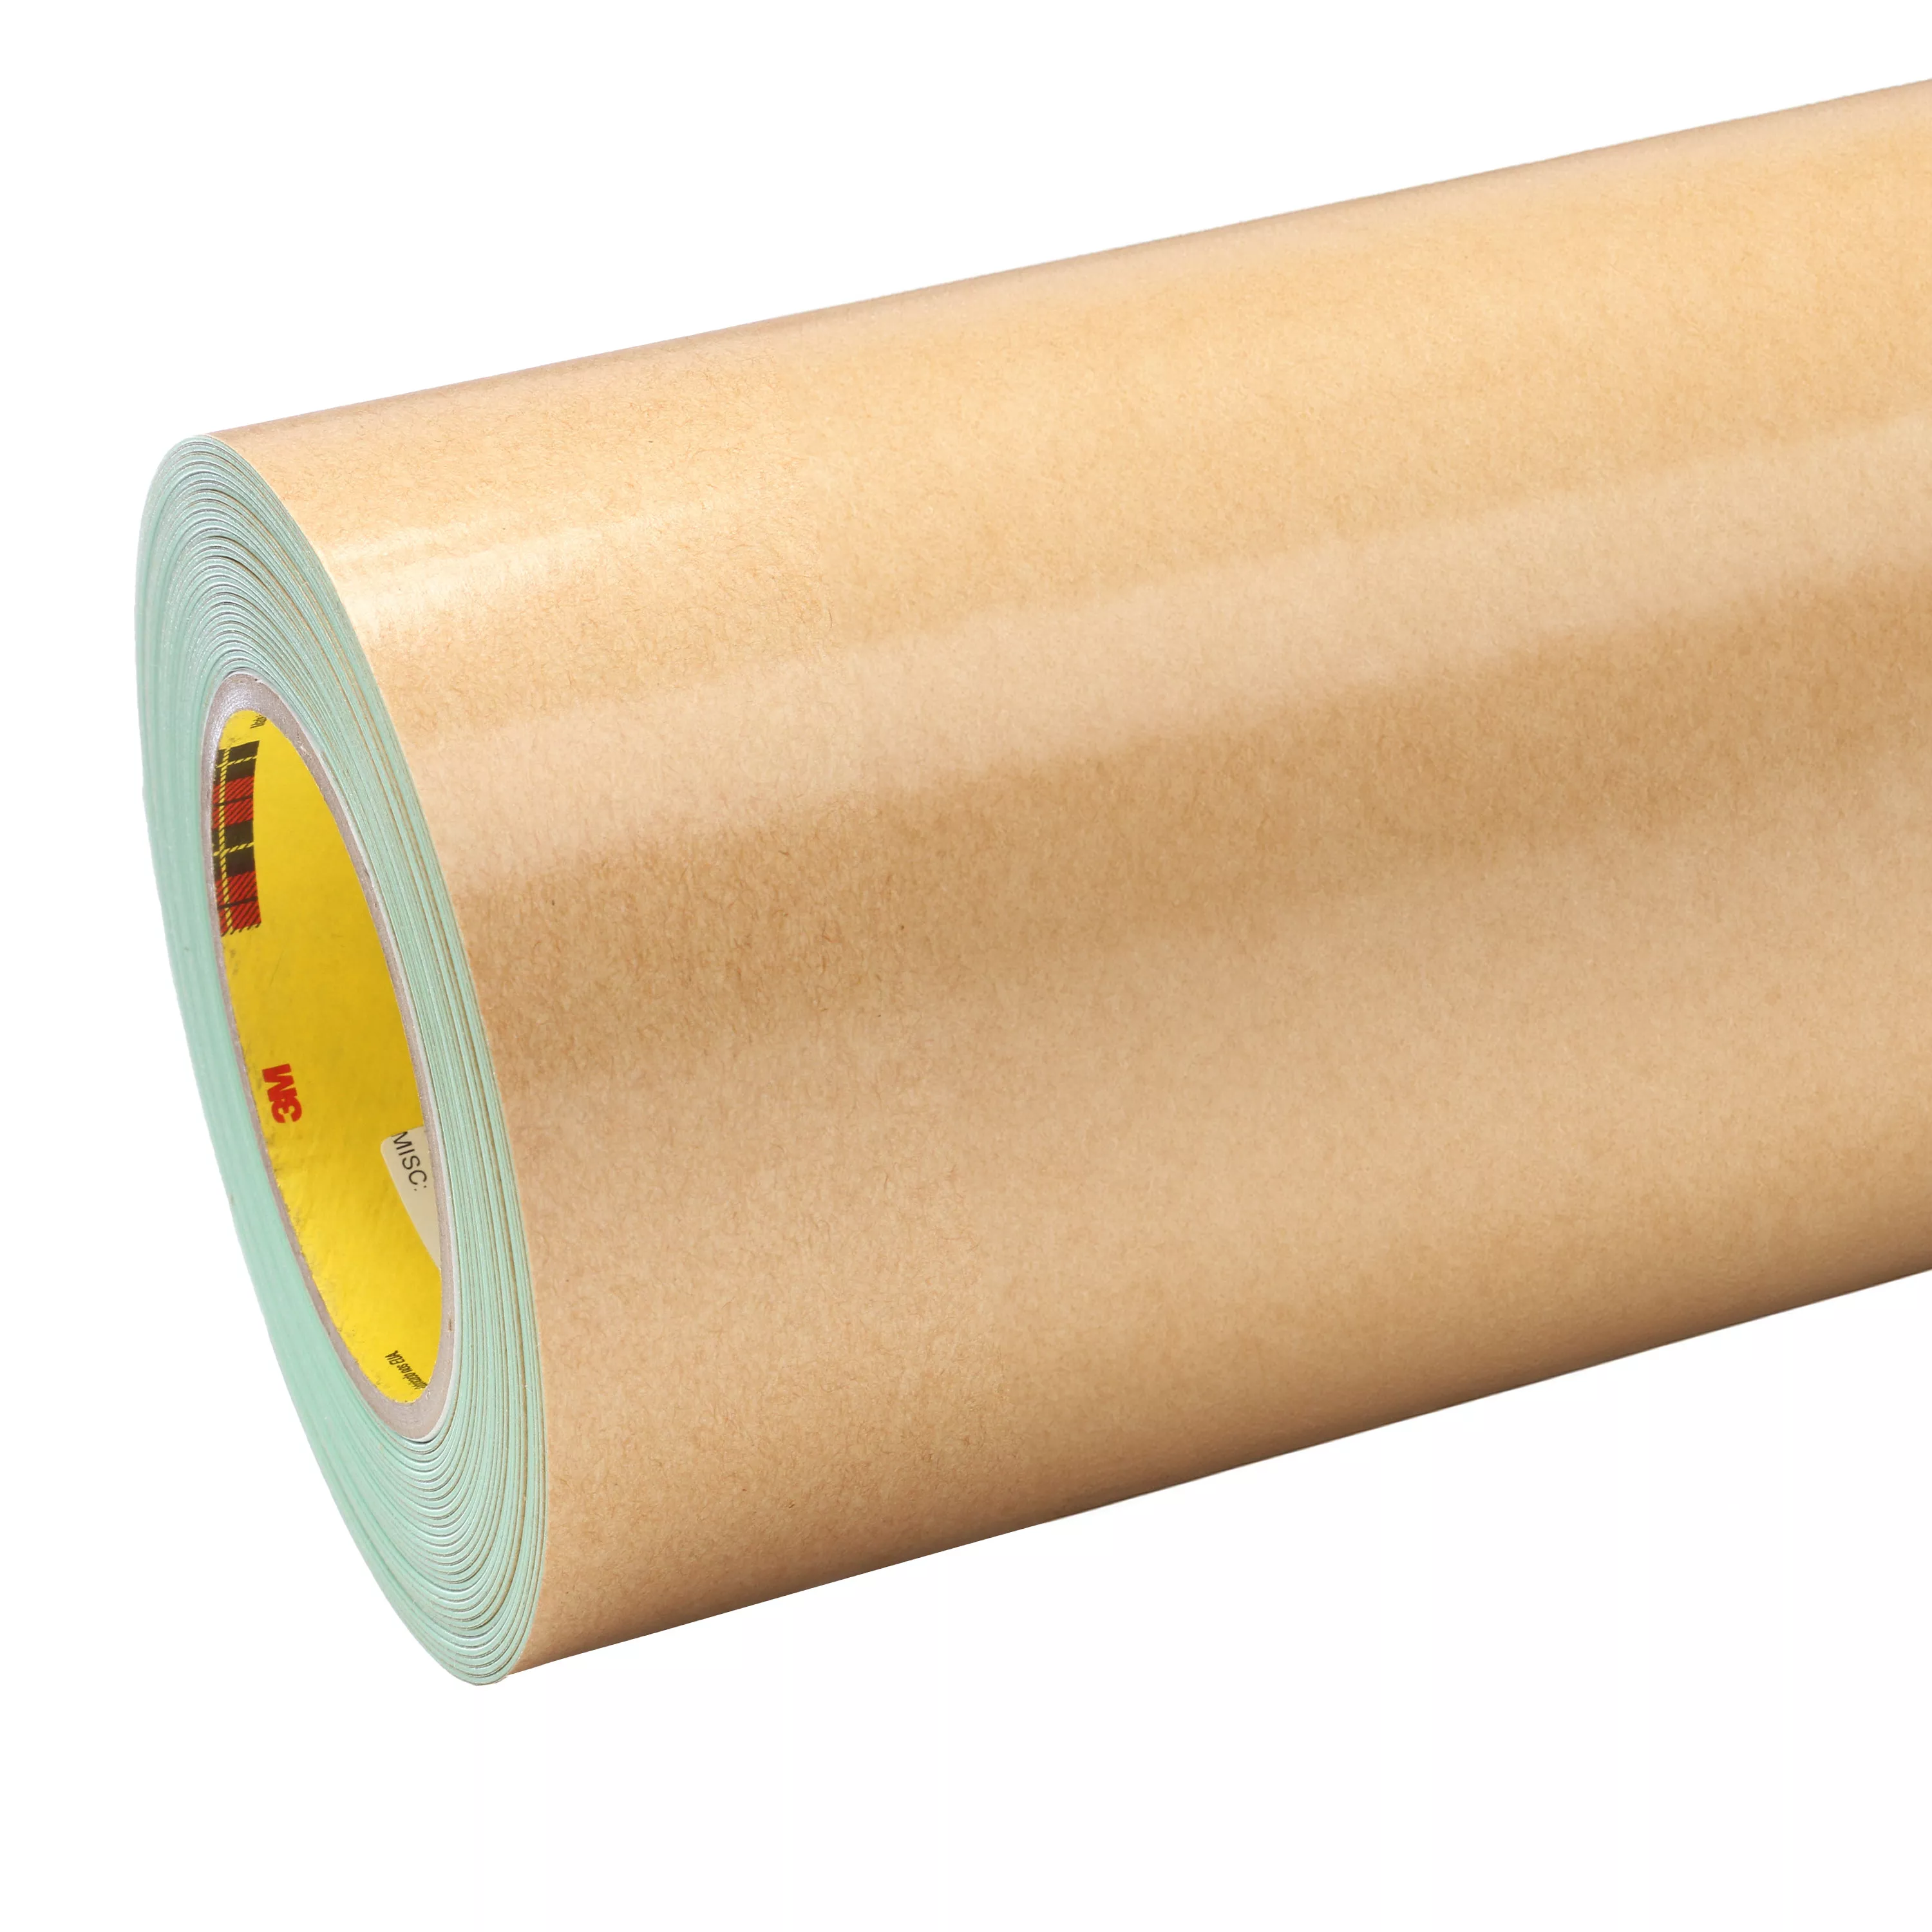 3M™ Impact Stripping Tape 500, Green, 30 in x 10 yd, 36 mil, 1 roll per
case